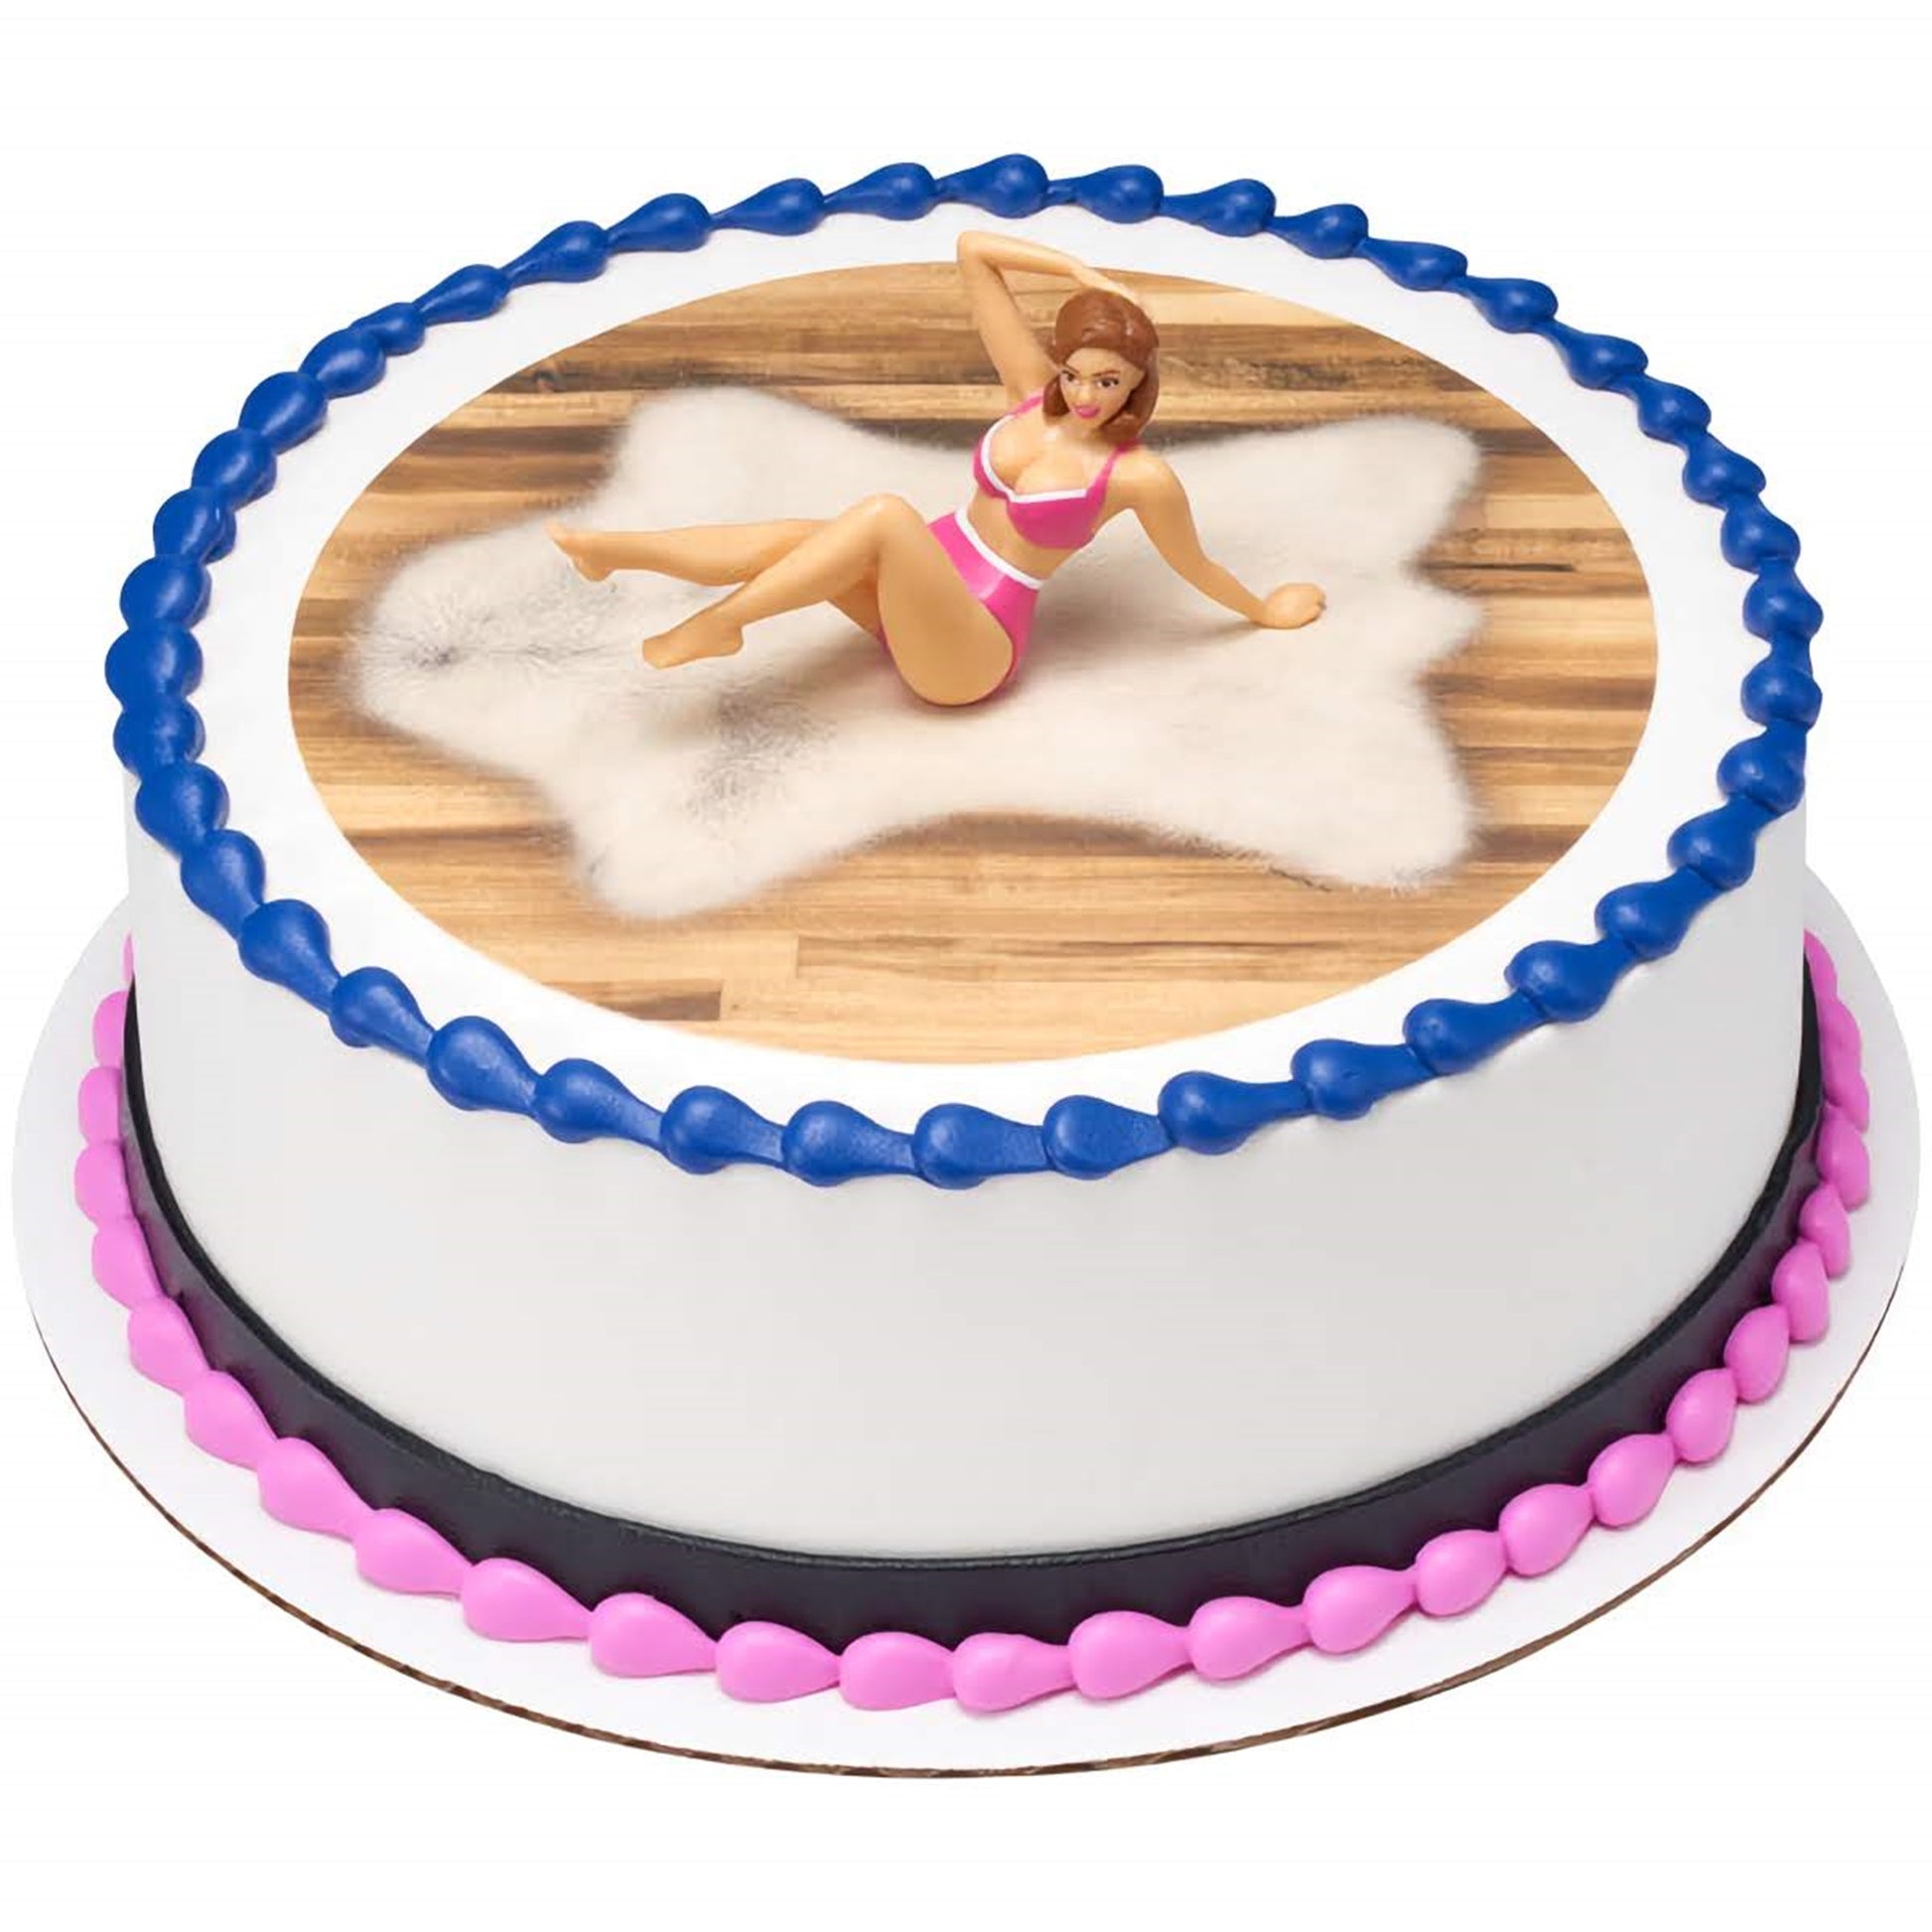 A round cake topped with a 3D topper of a woman in a bikini, set against a white and wood-like icing background with a blue border. This cake, available at Lynn's Cake, Candy, and Chocolate Supplies, is ideal for themed parties looking for a fun and flirty touch.